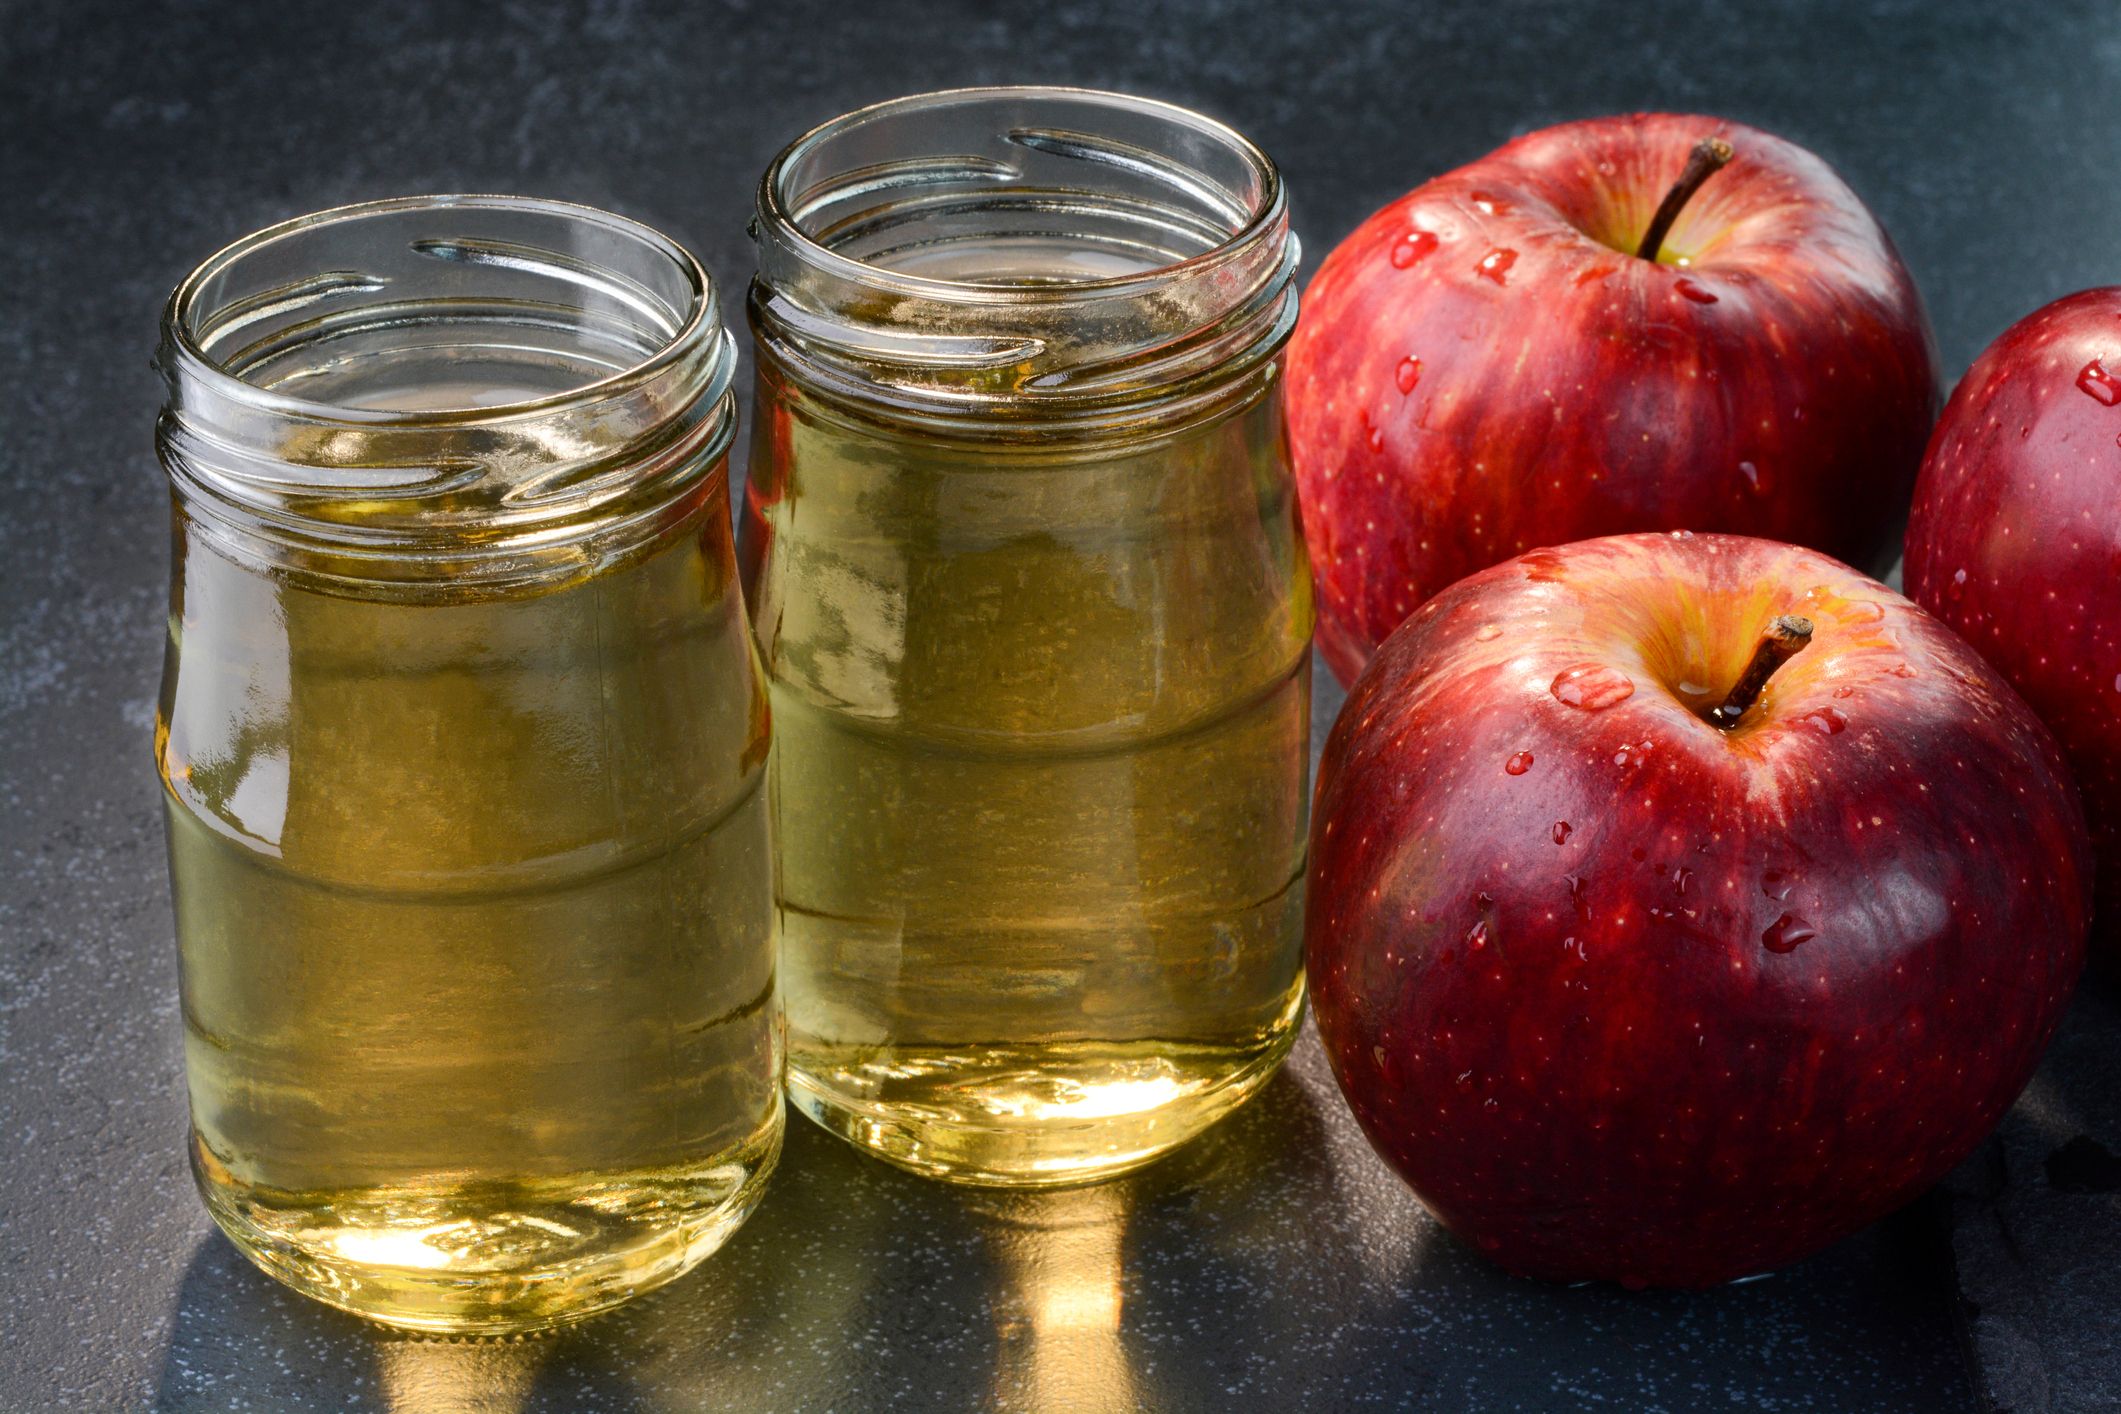 The Truth About Apple Cider Vinegar and Other ”Miracle” Health Foods